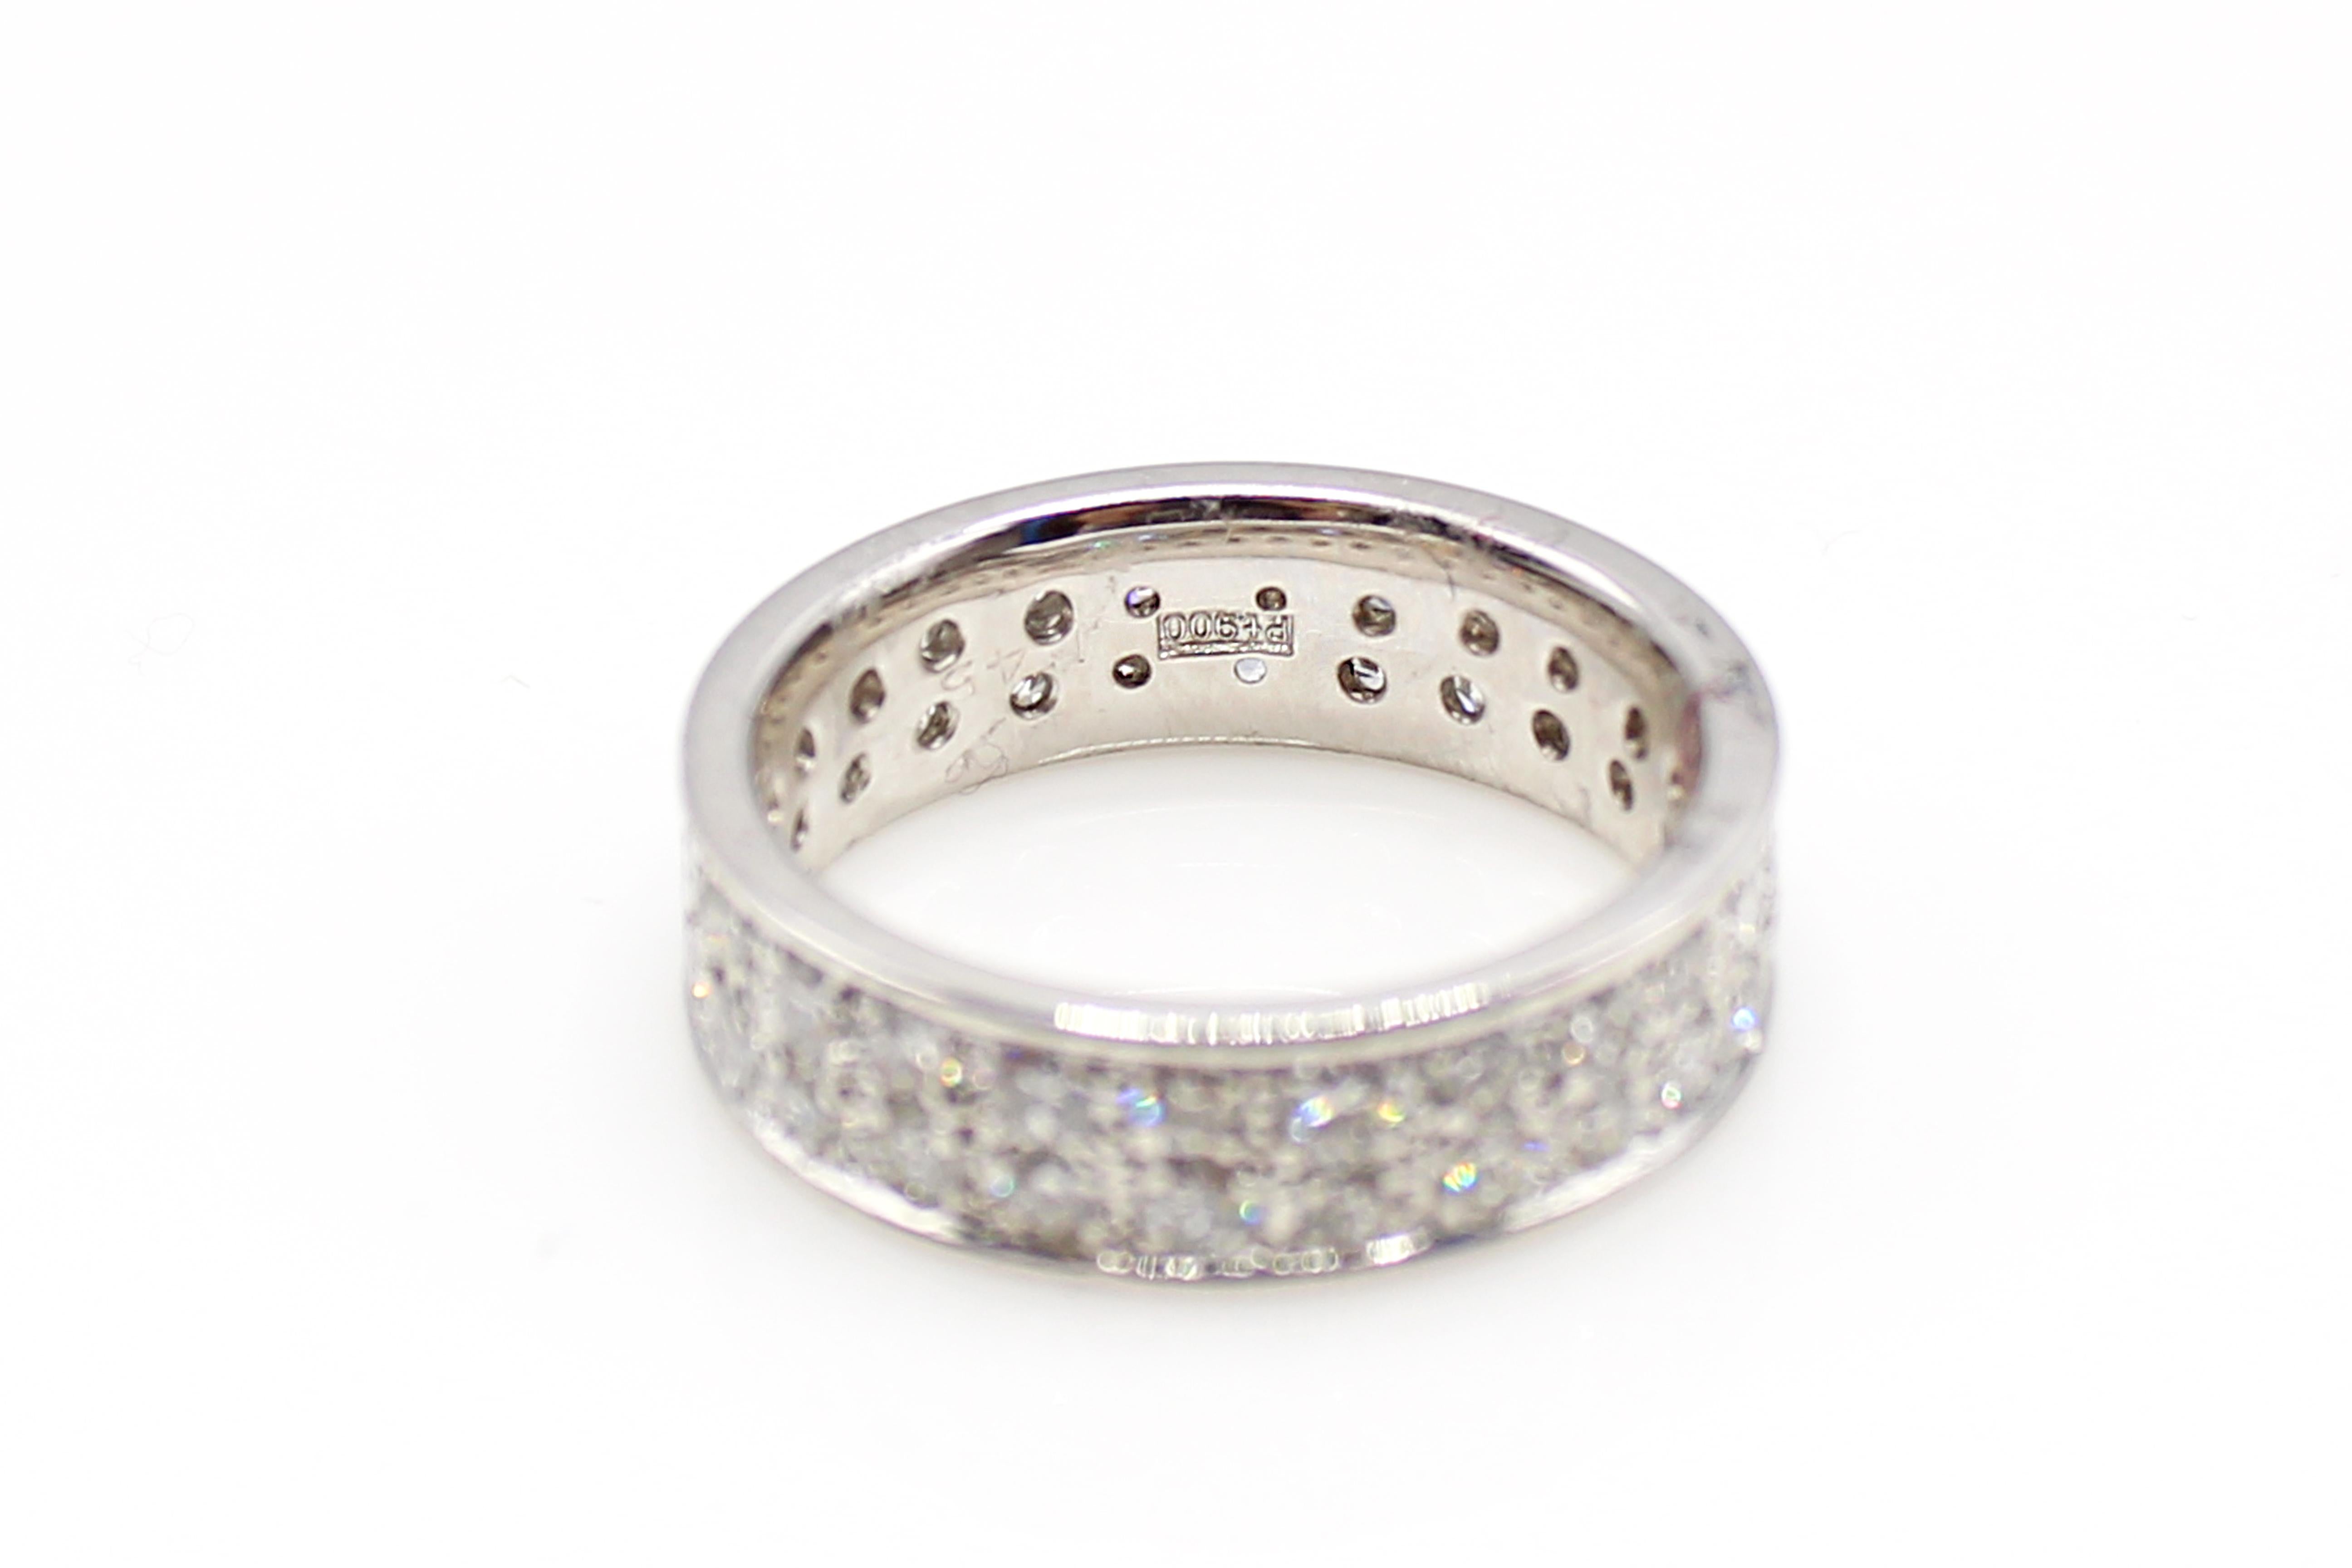 Beautifully hand-crafted in platinum this twin-row diamond eternity band is finely set with 48 bright, white and sparkly round brilliant cut diamonds. Each diamond is perfectly matched to give a harmonized appearance of flowing white. The average